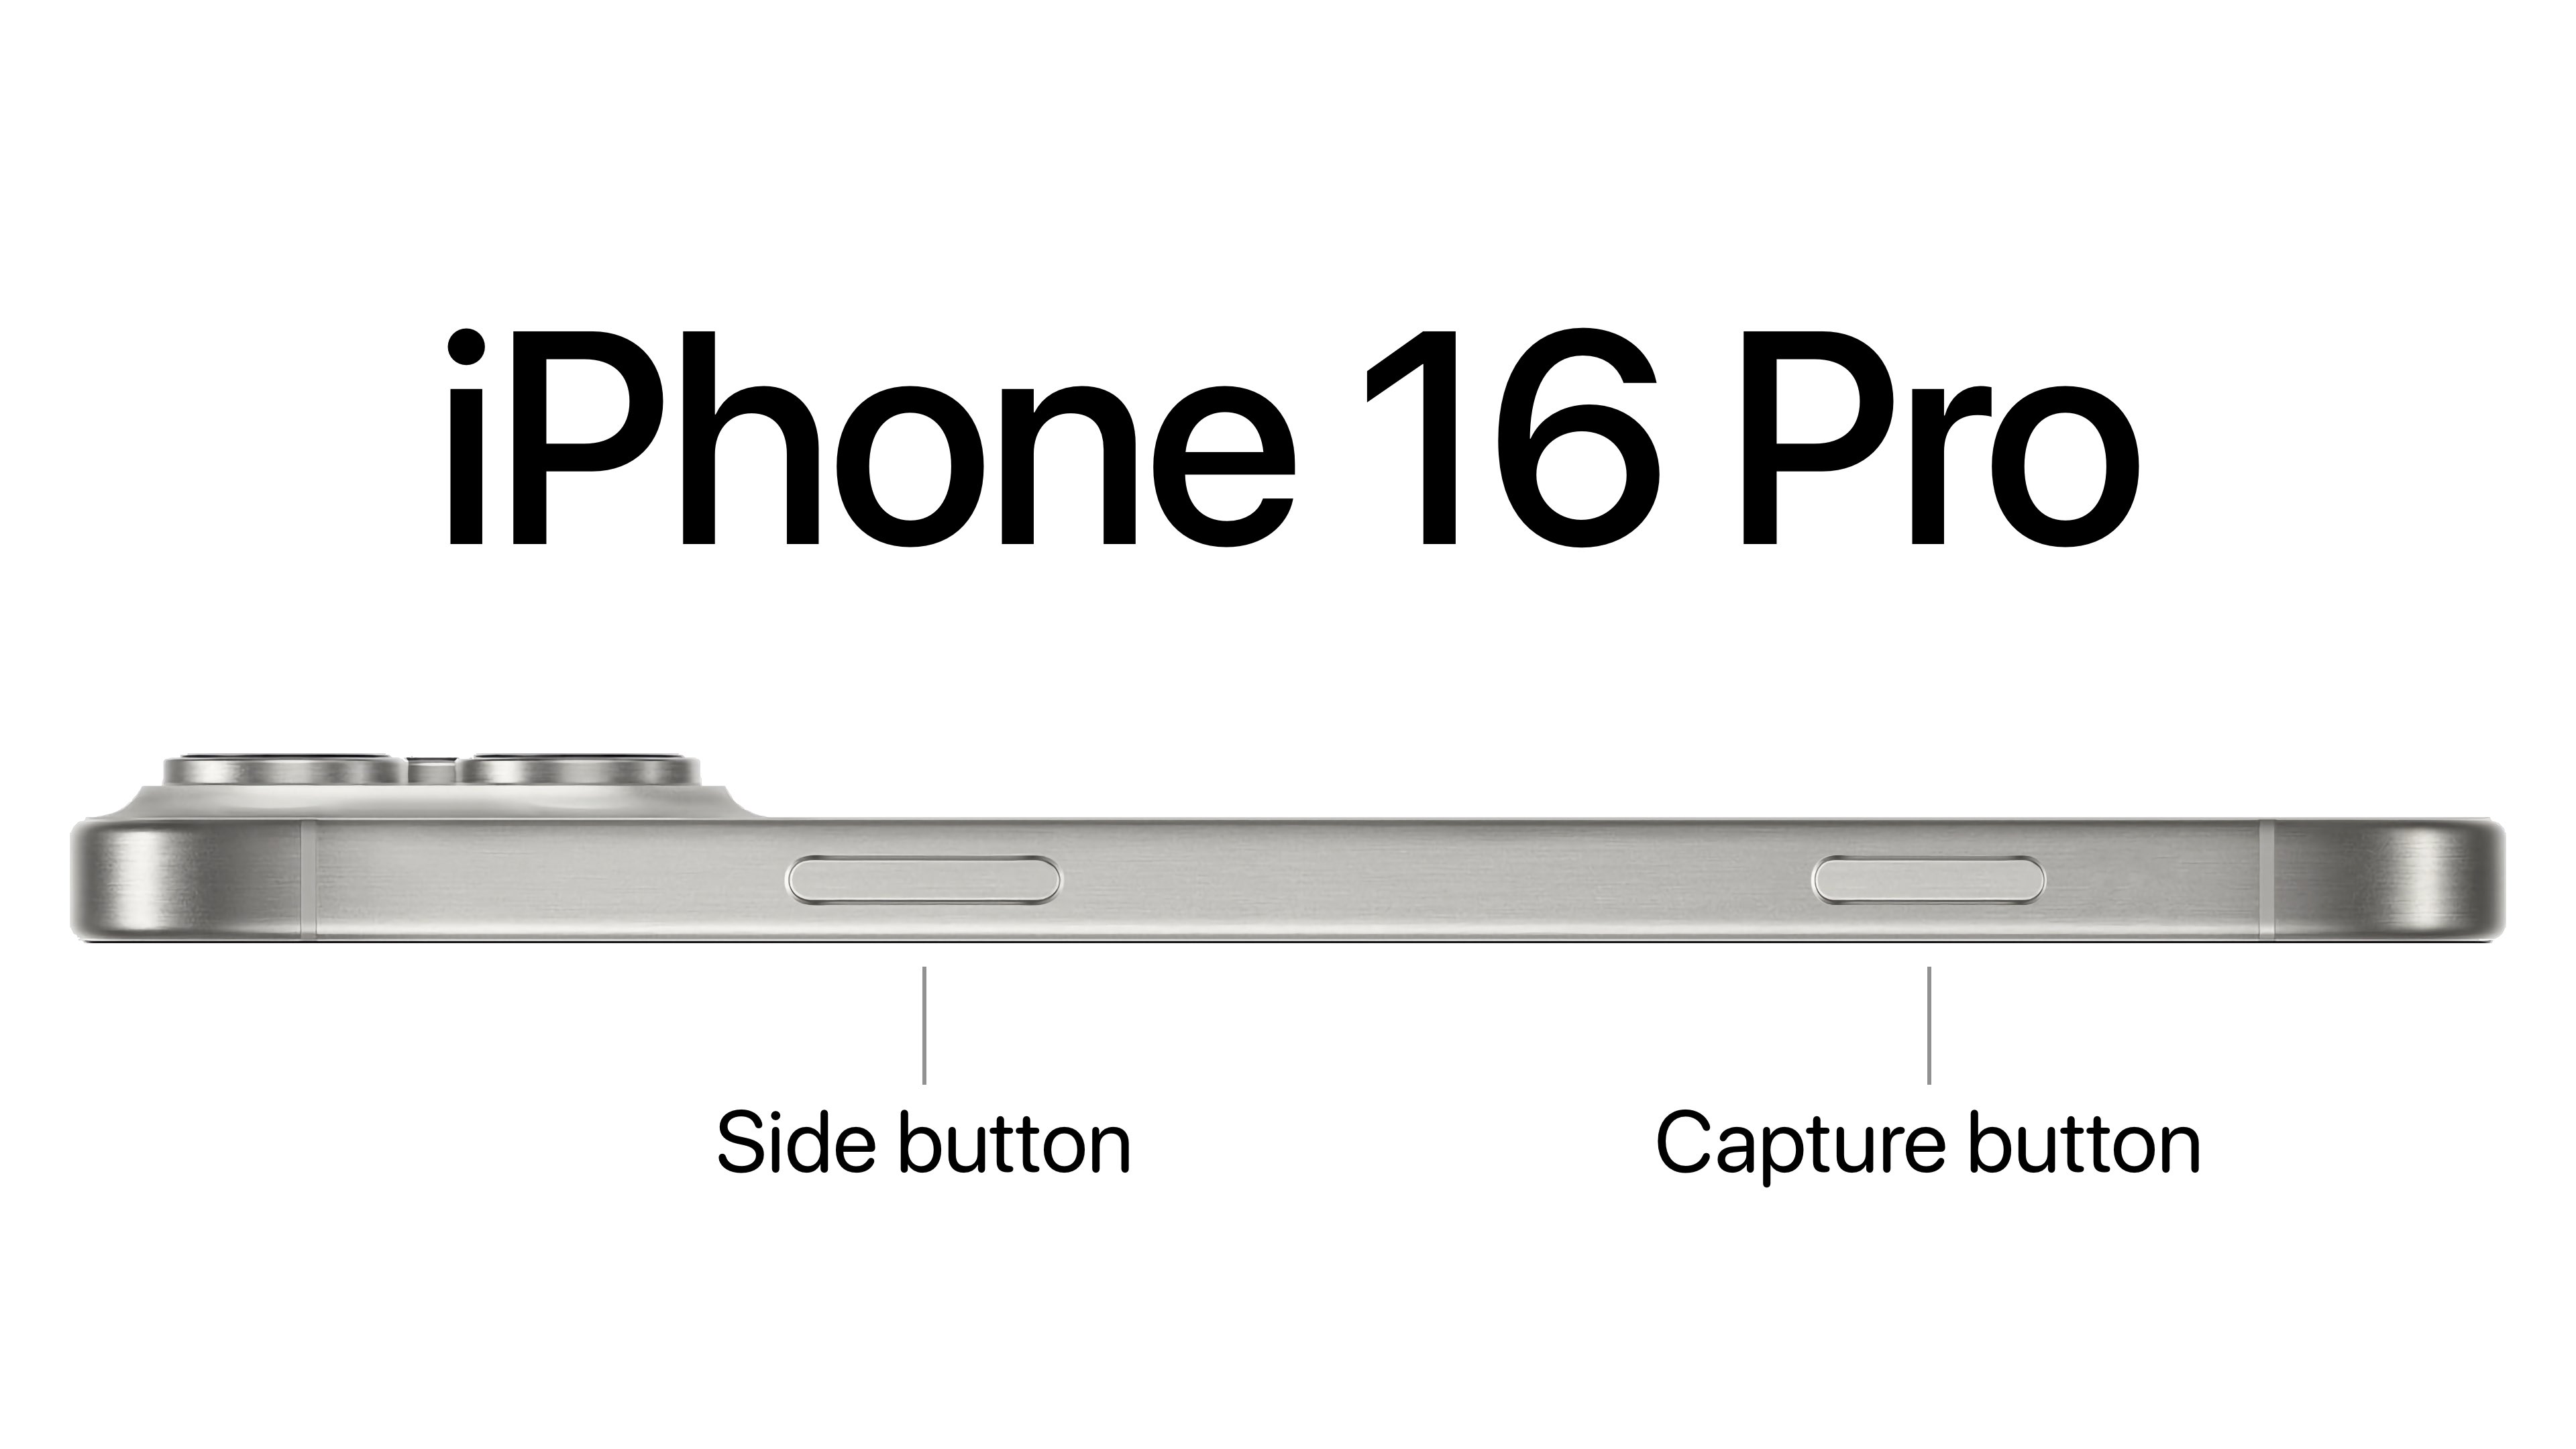 Apple Hub on X: "New details about the “Capture button” on the upcoming iPhone 16 models: - mechanical camera button - responds to touch and pressure - zoom in and out by